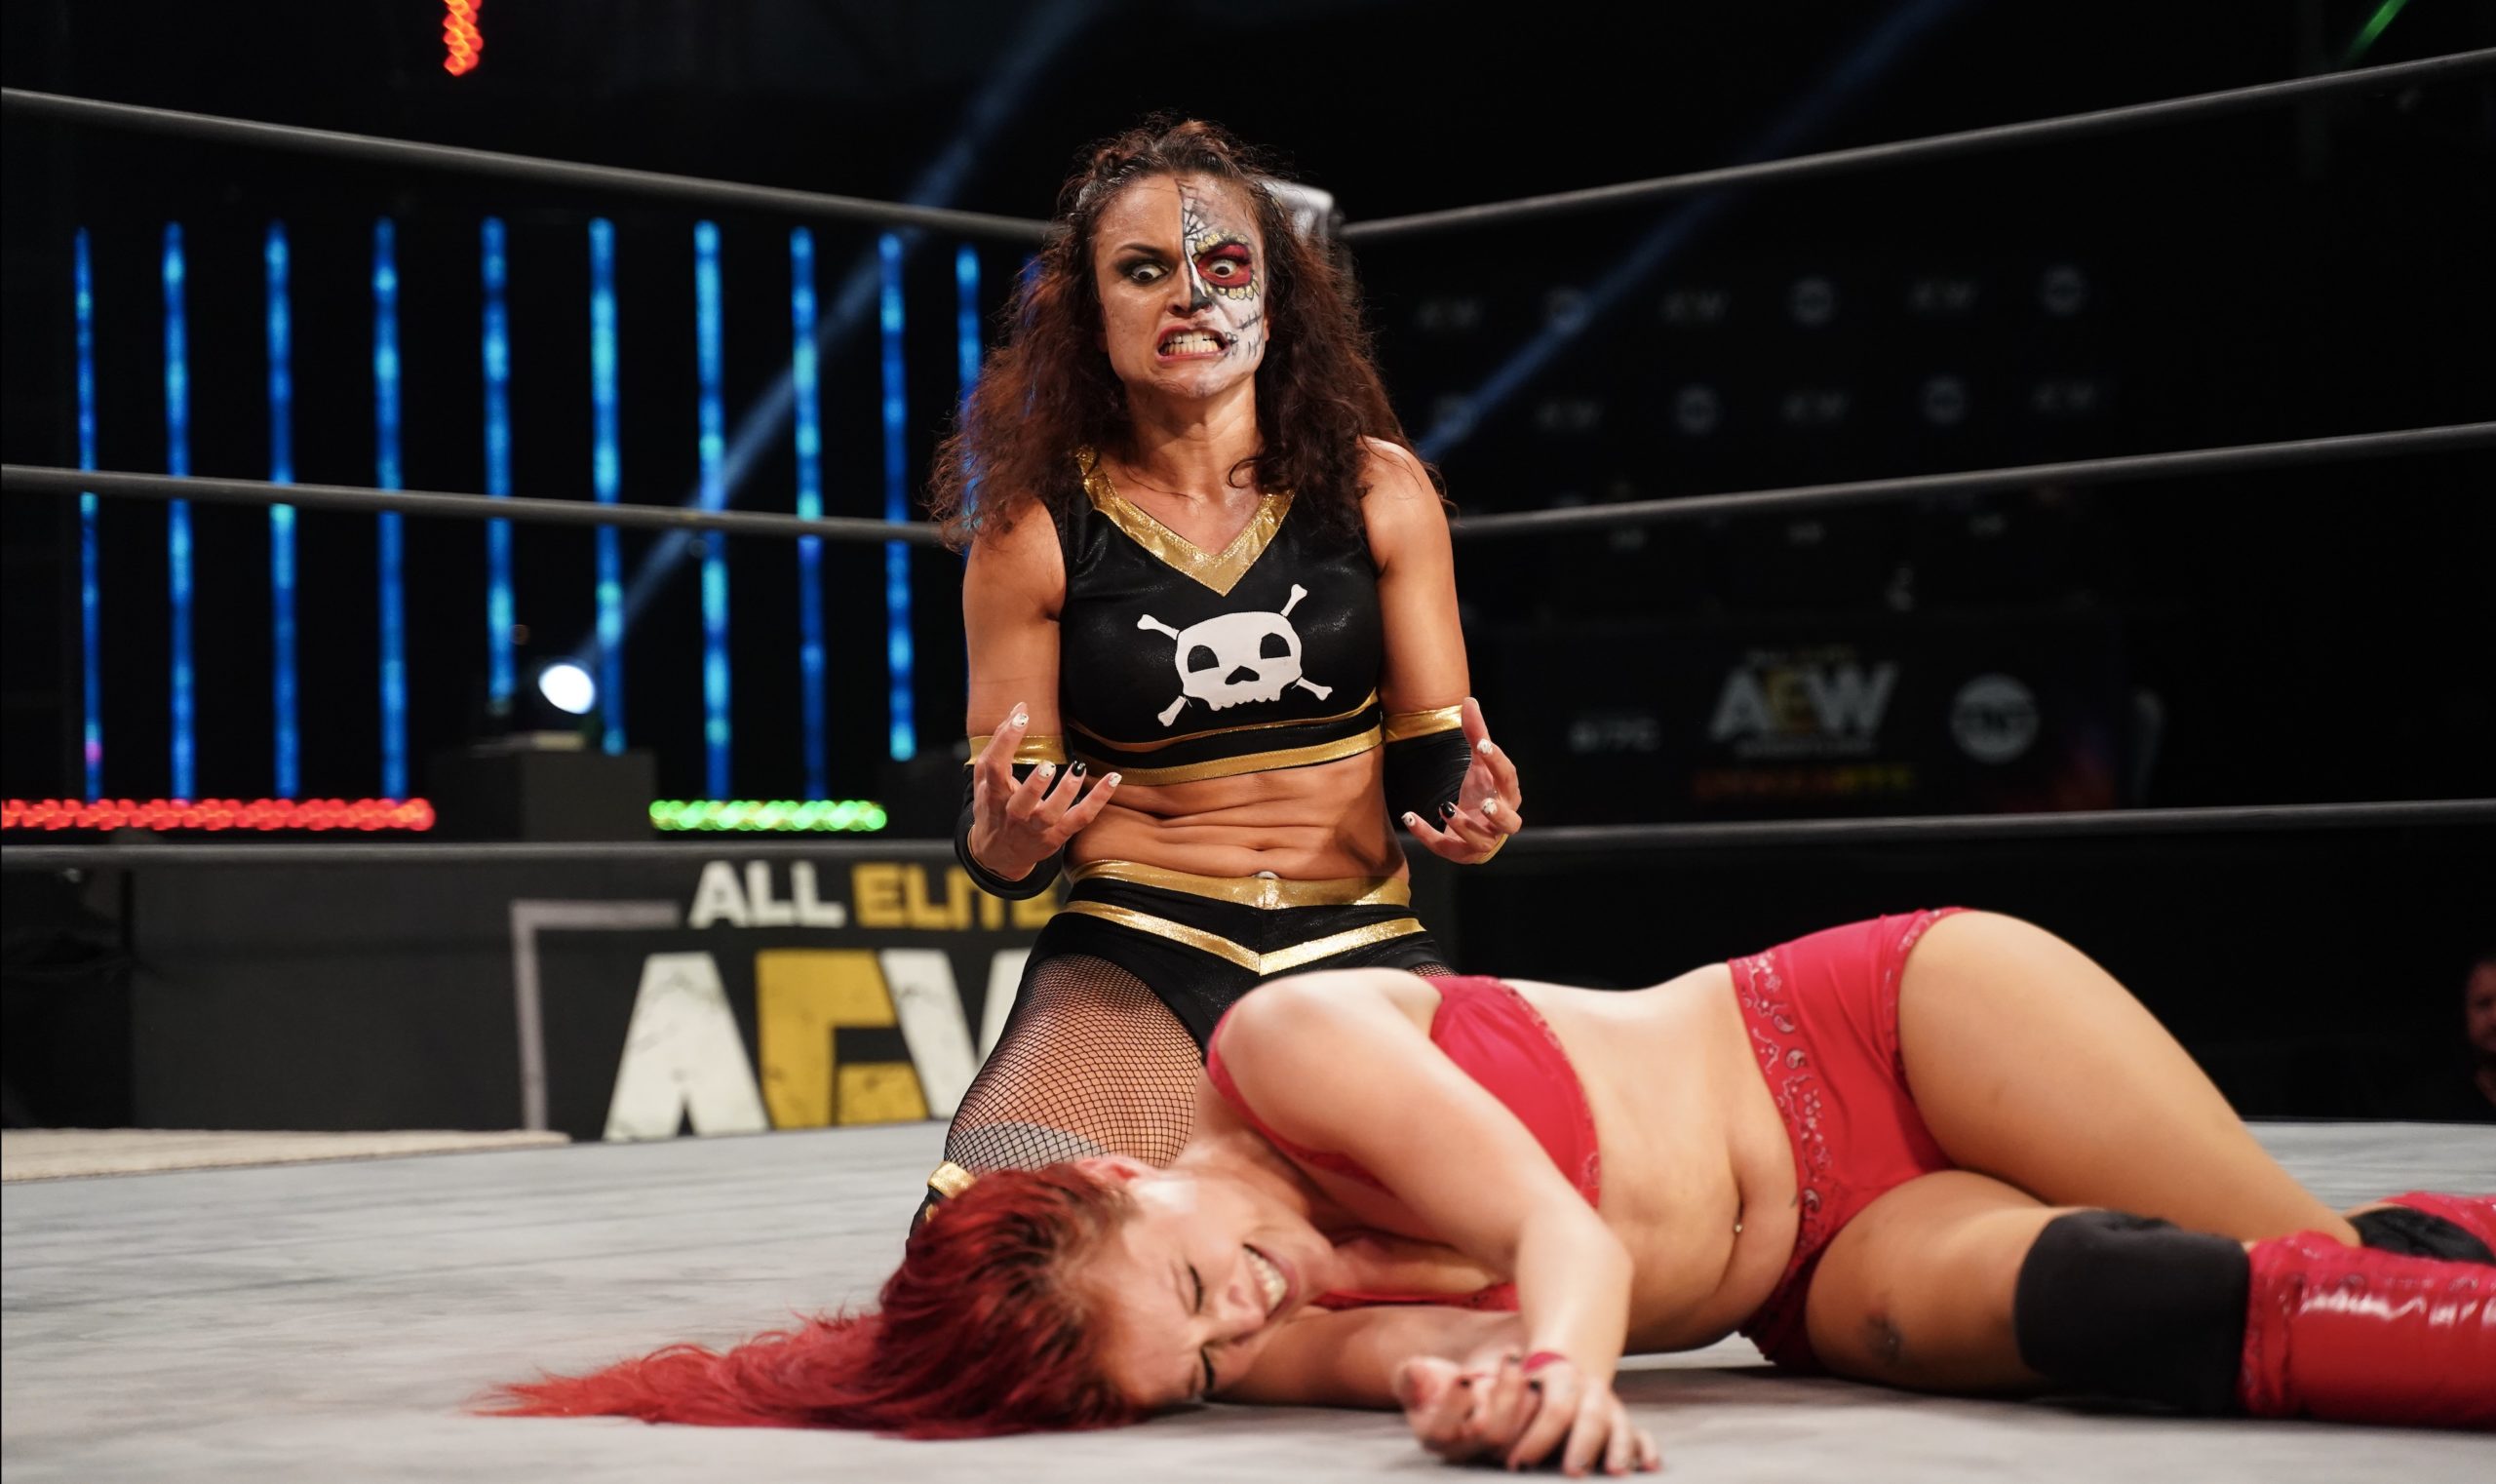 AEW programming earlier this year while her tag-team partner, Diamante, has...